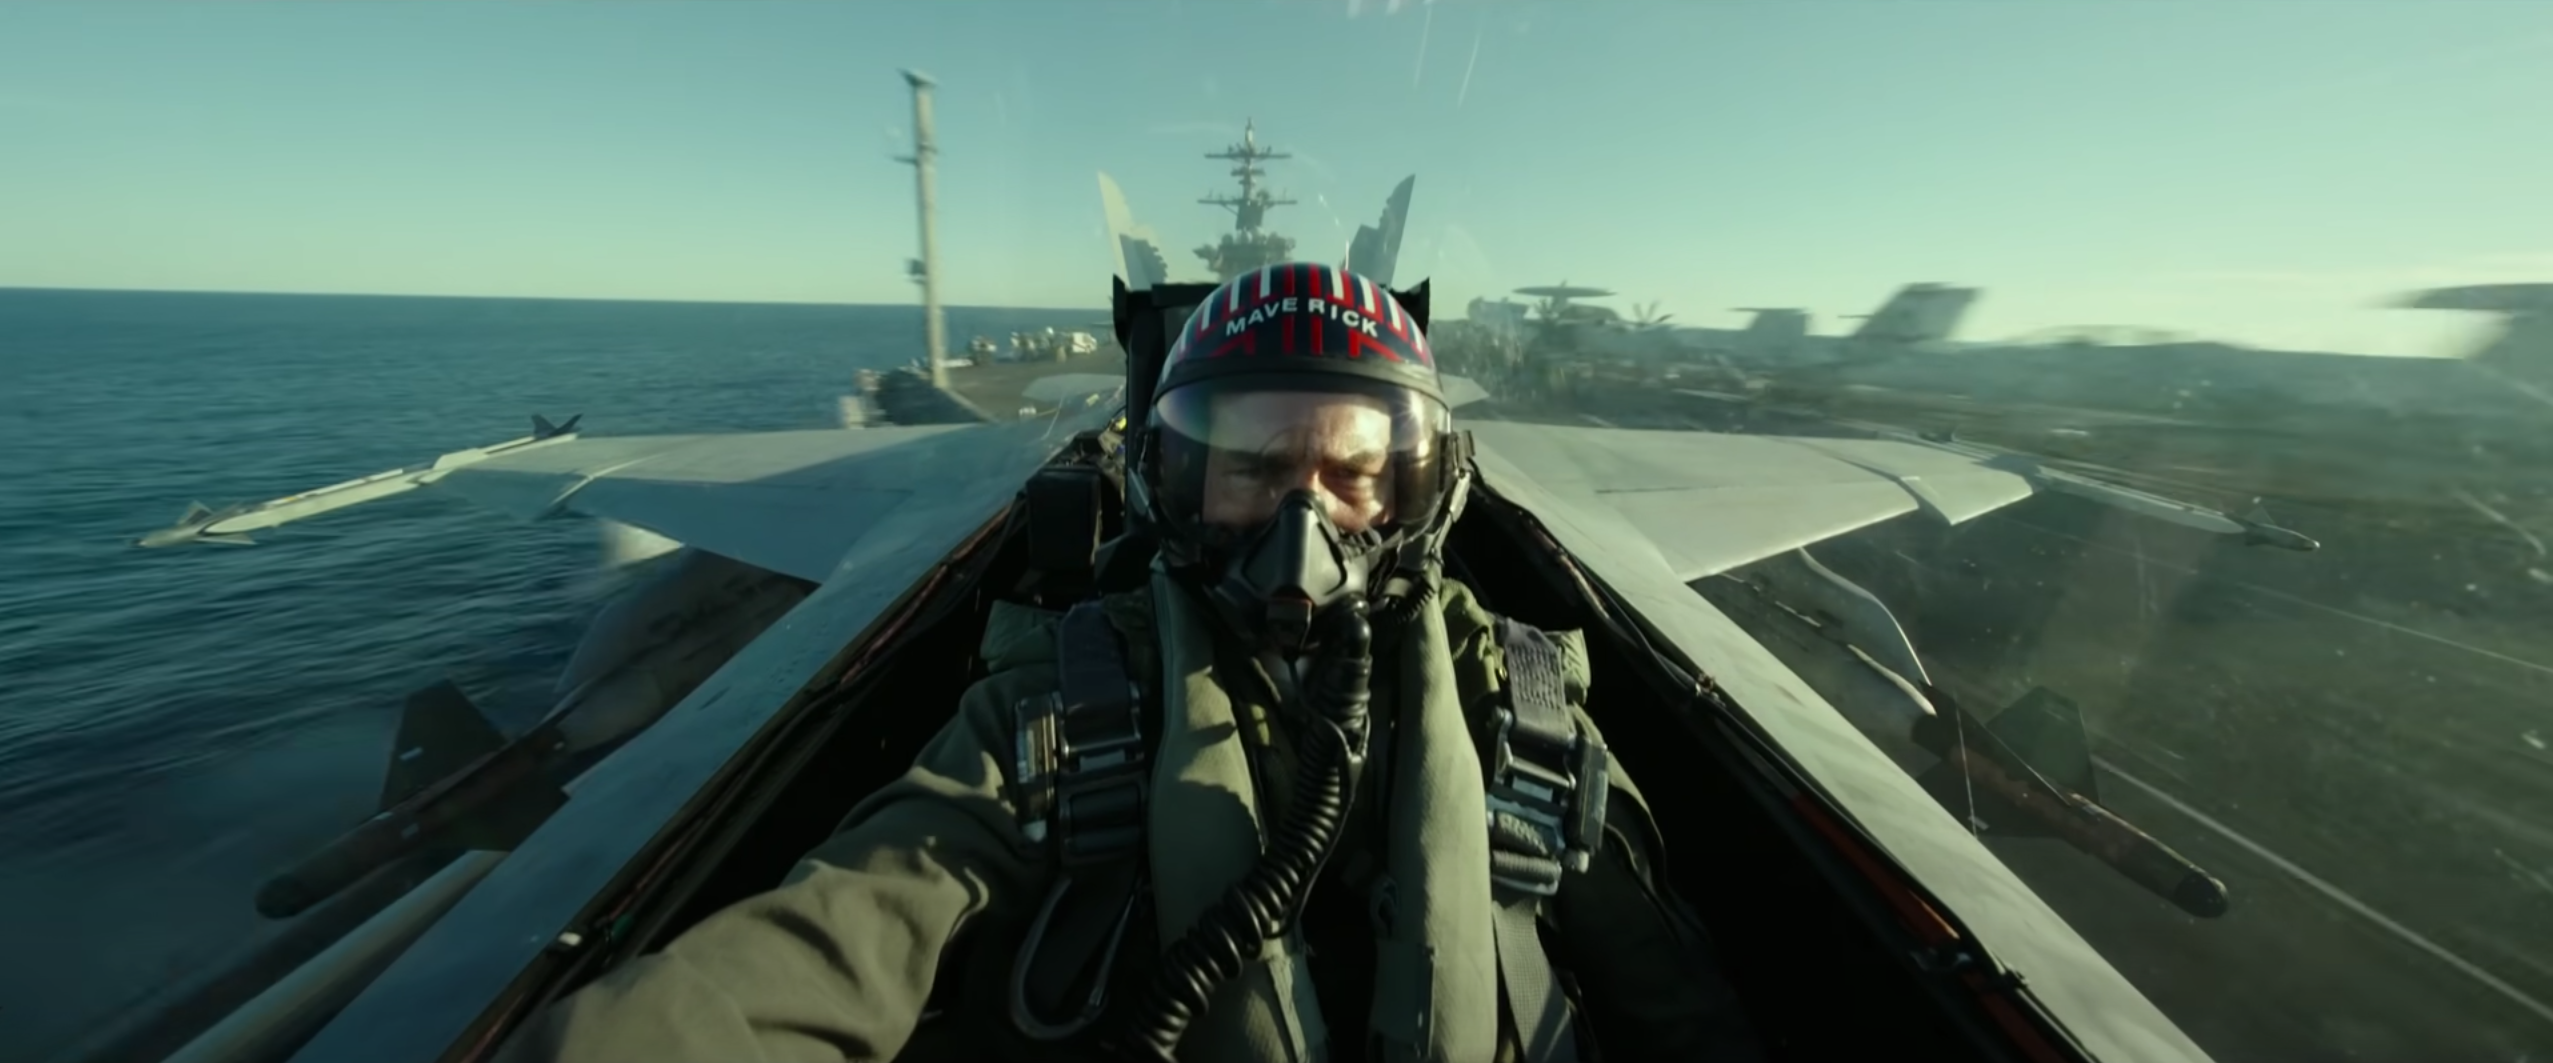 ‘Top Gun: Maverick’ features the most realistic aerial combat ever depicted on film